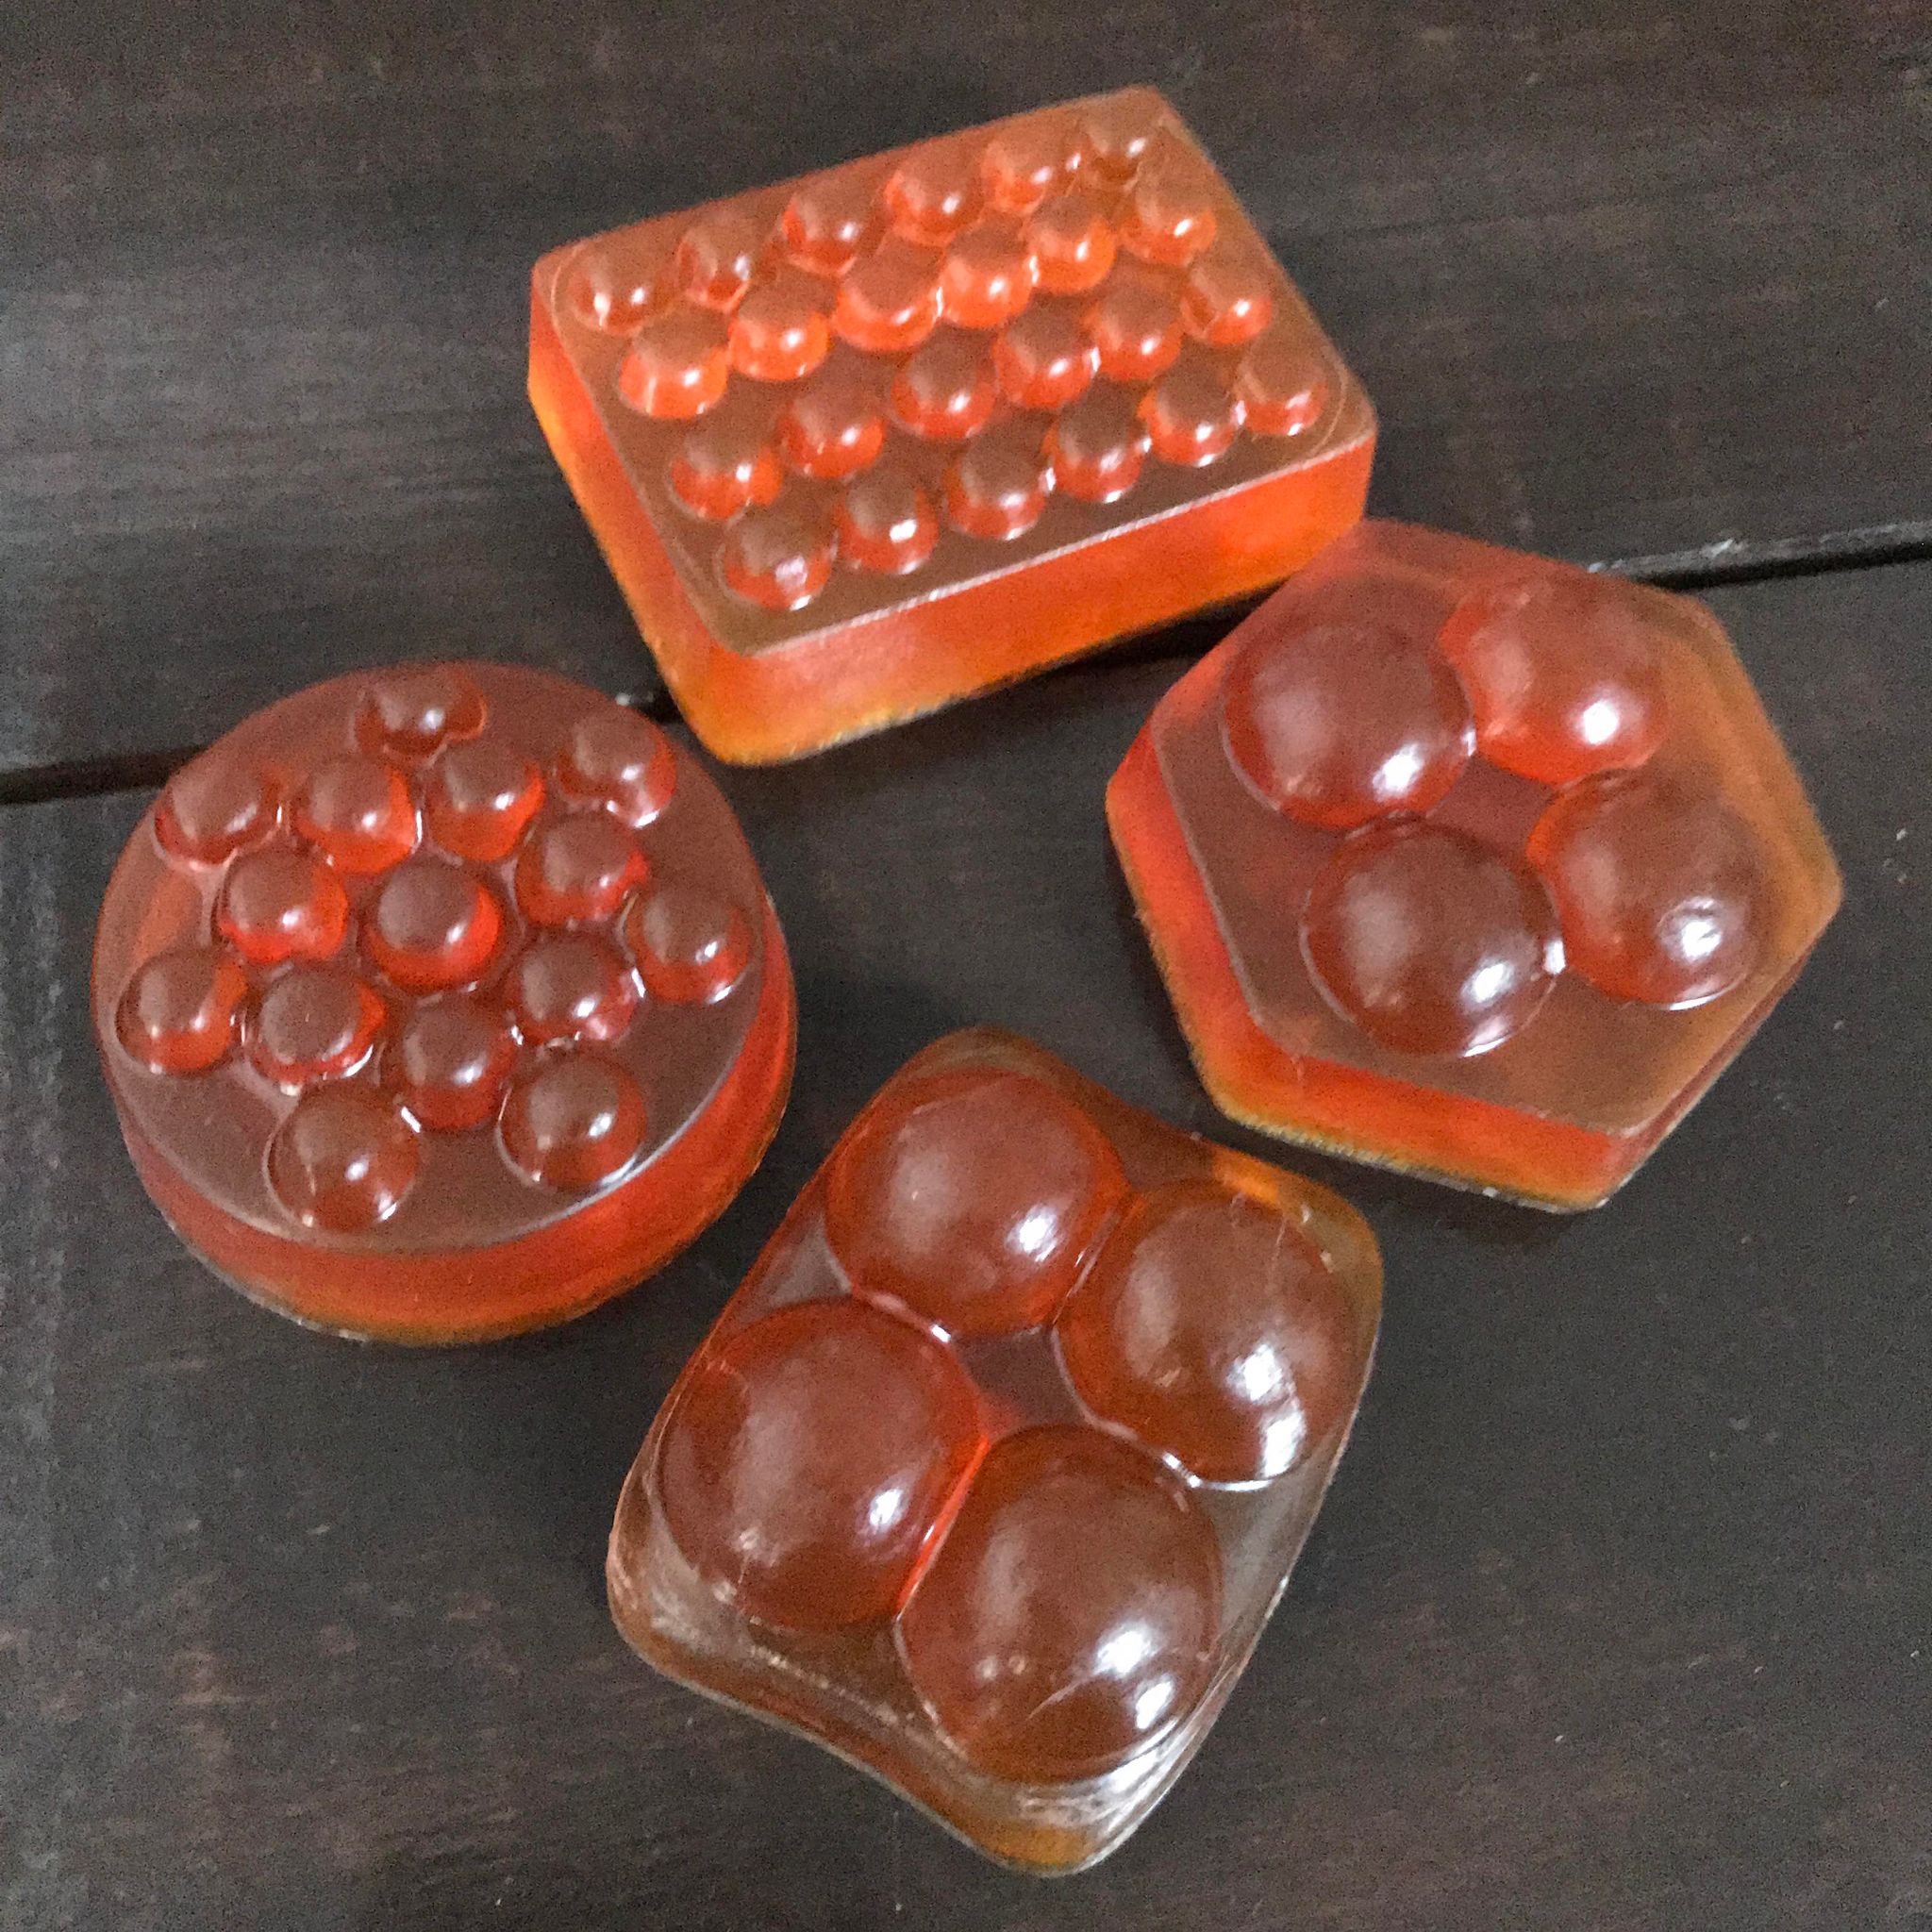 Honey turmerc vegetable glycerin massage soaps  made in canada by Simply Natural Canada with honey and tumeric